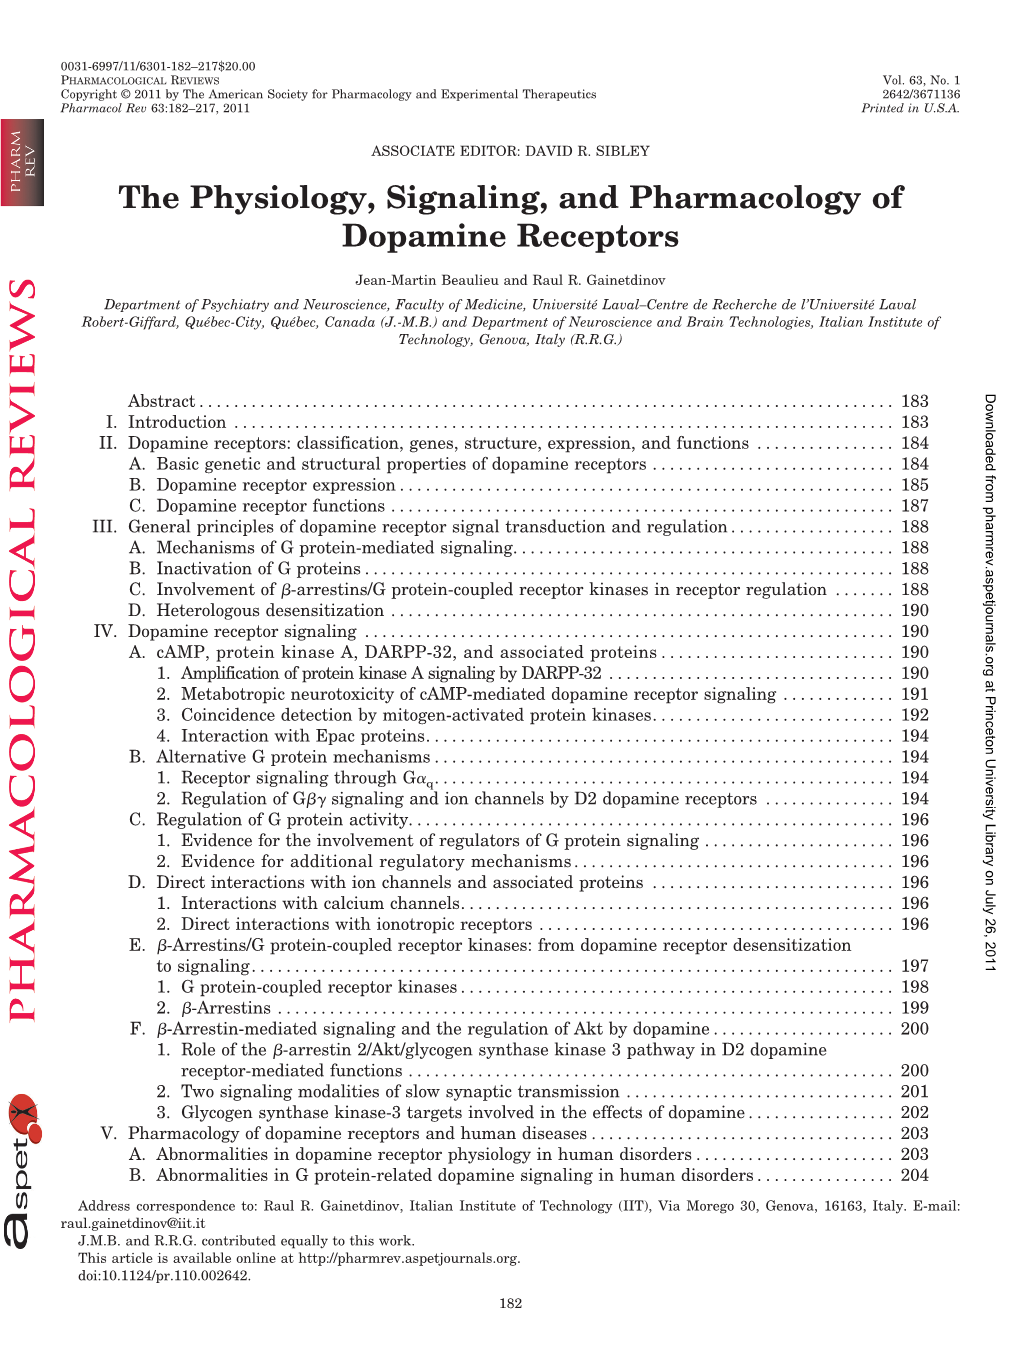 The Physiology, Signaling, and Pharmacology of Dopamine Receptors